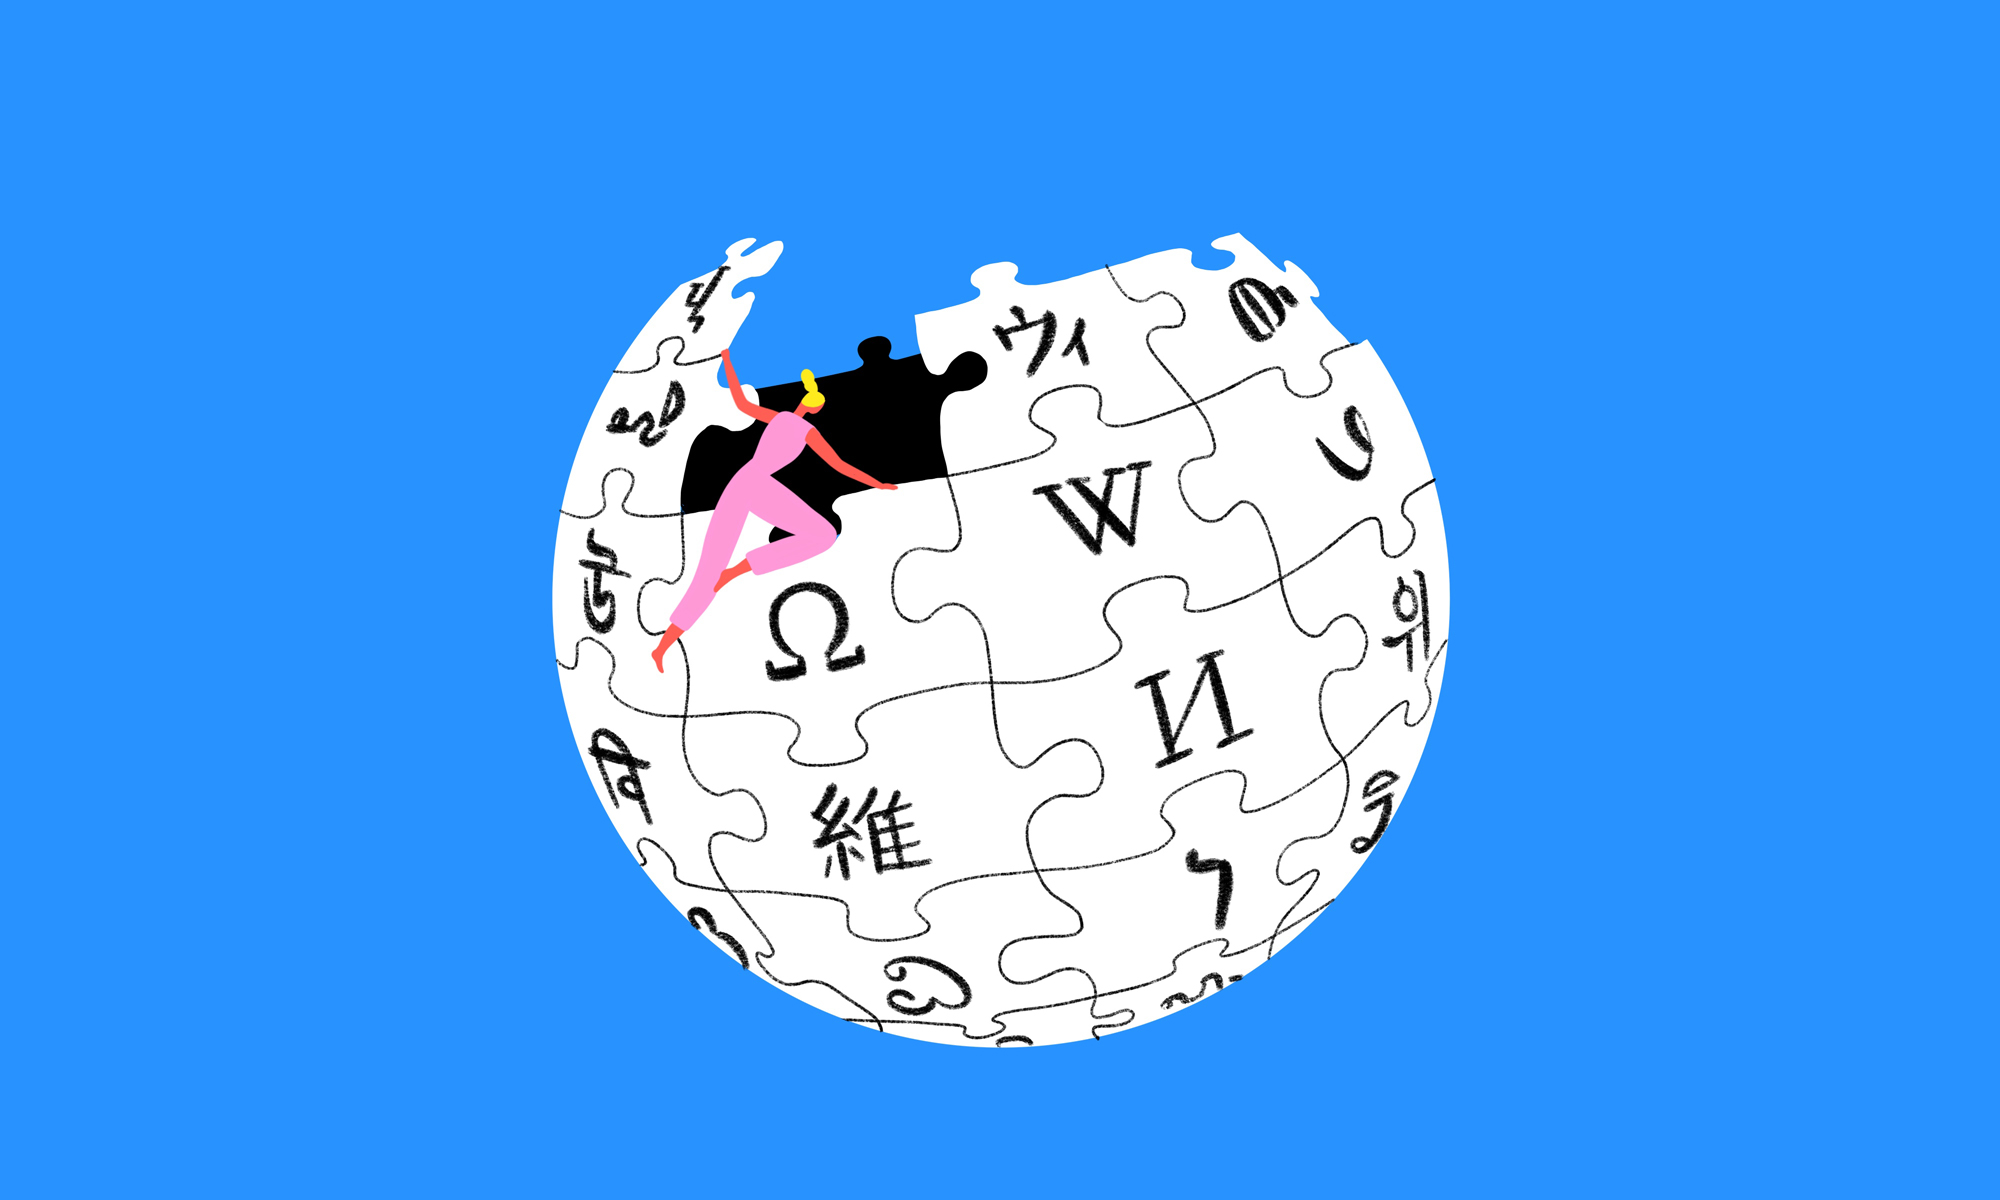 Get more from Wikipedia — try reading about a subject in a different
language